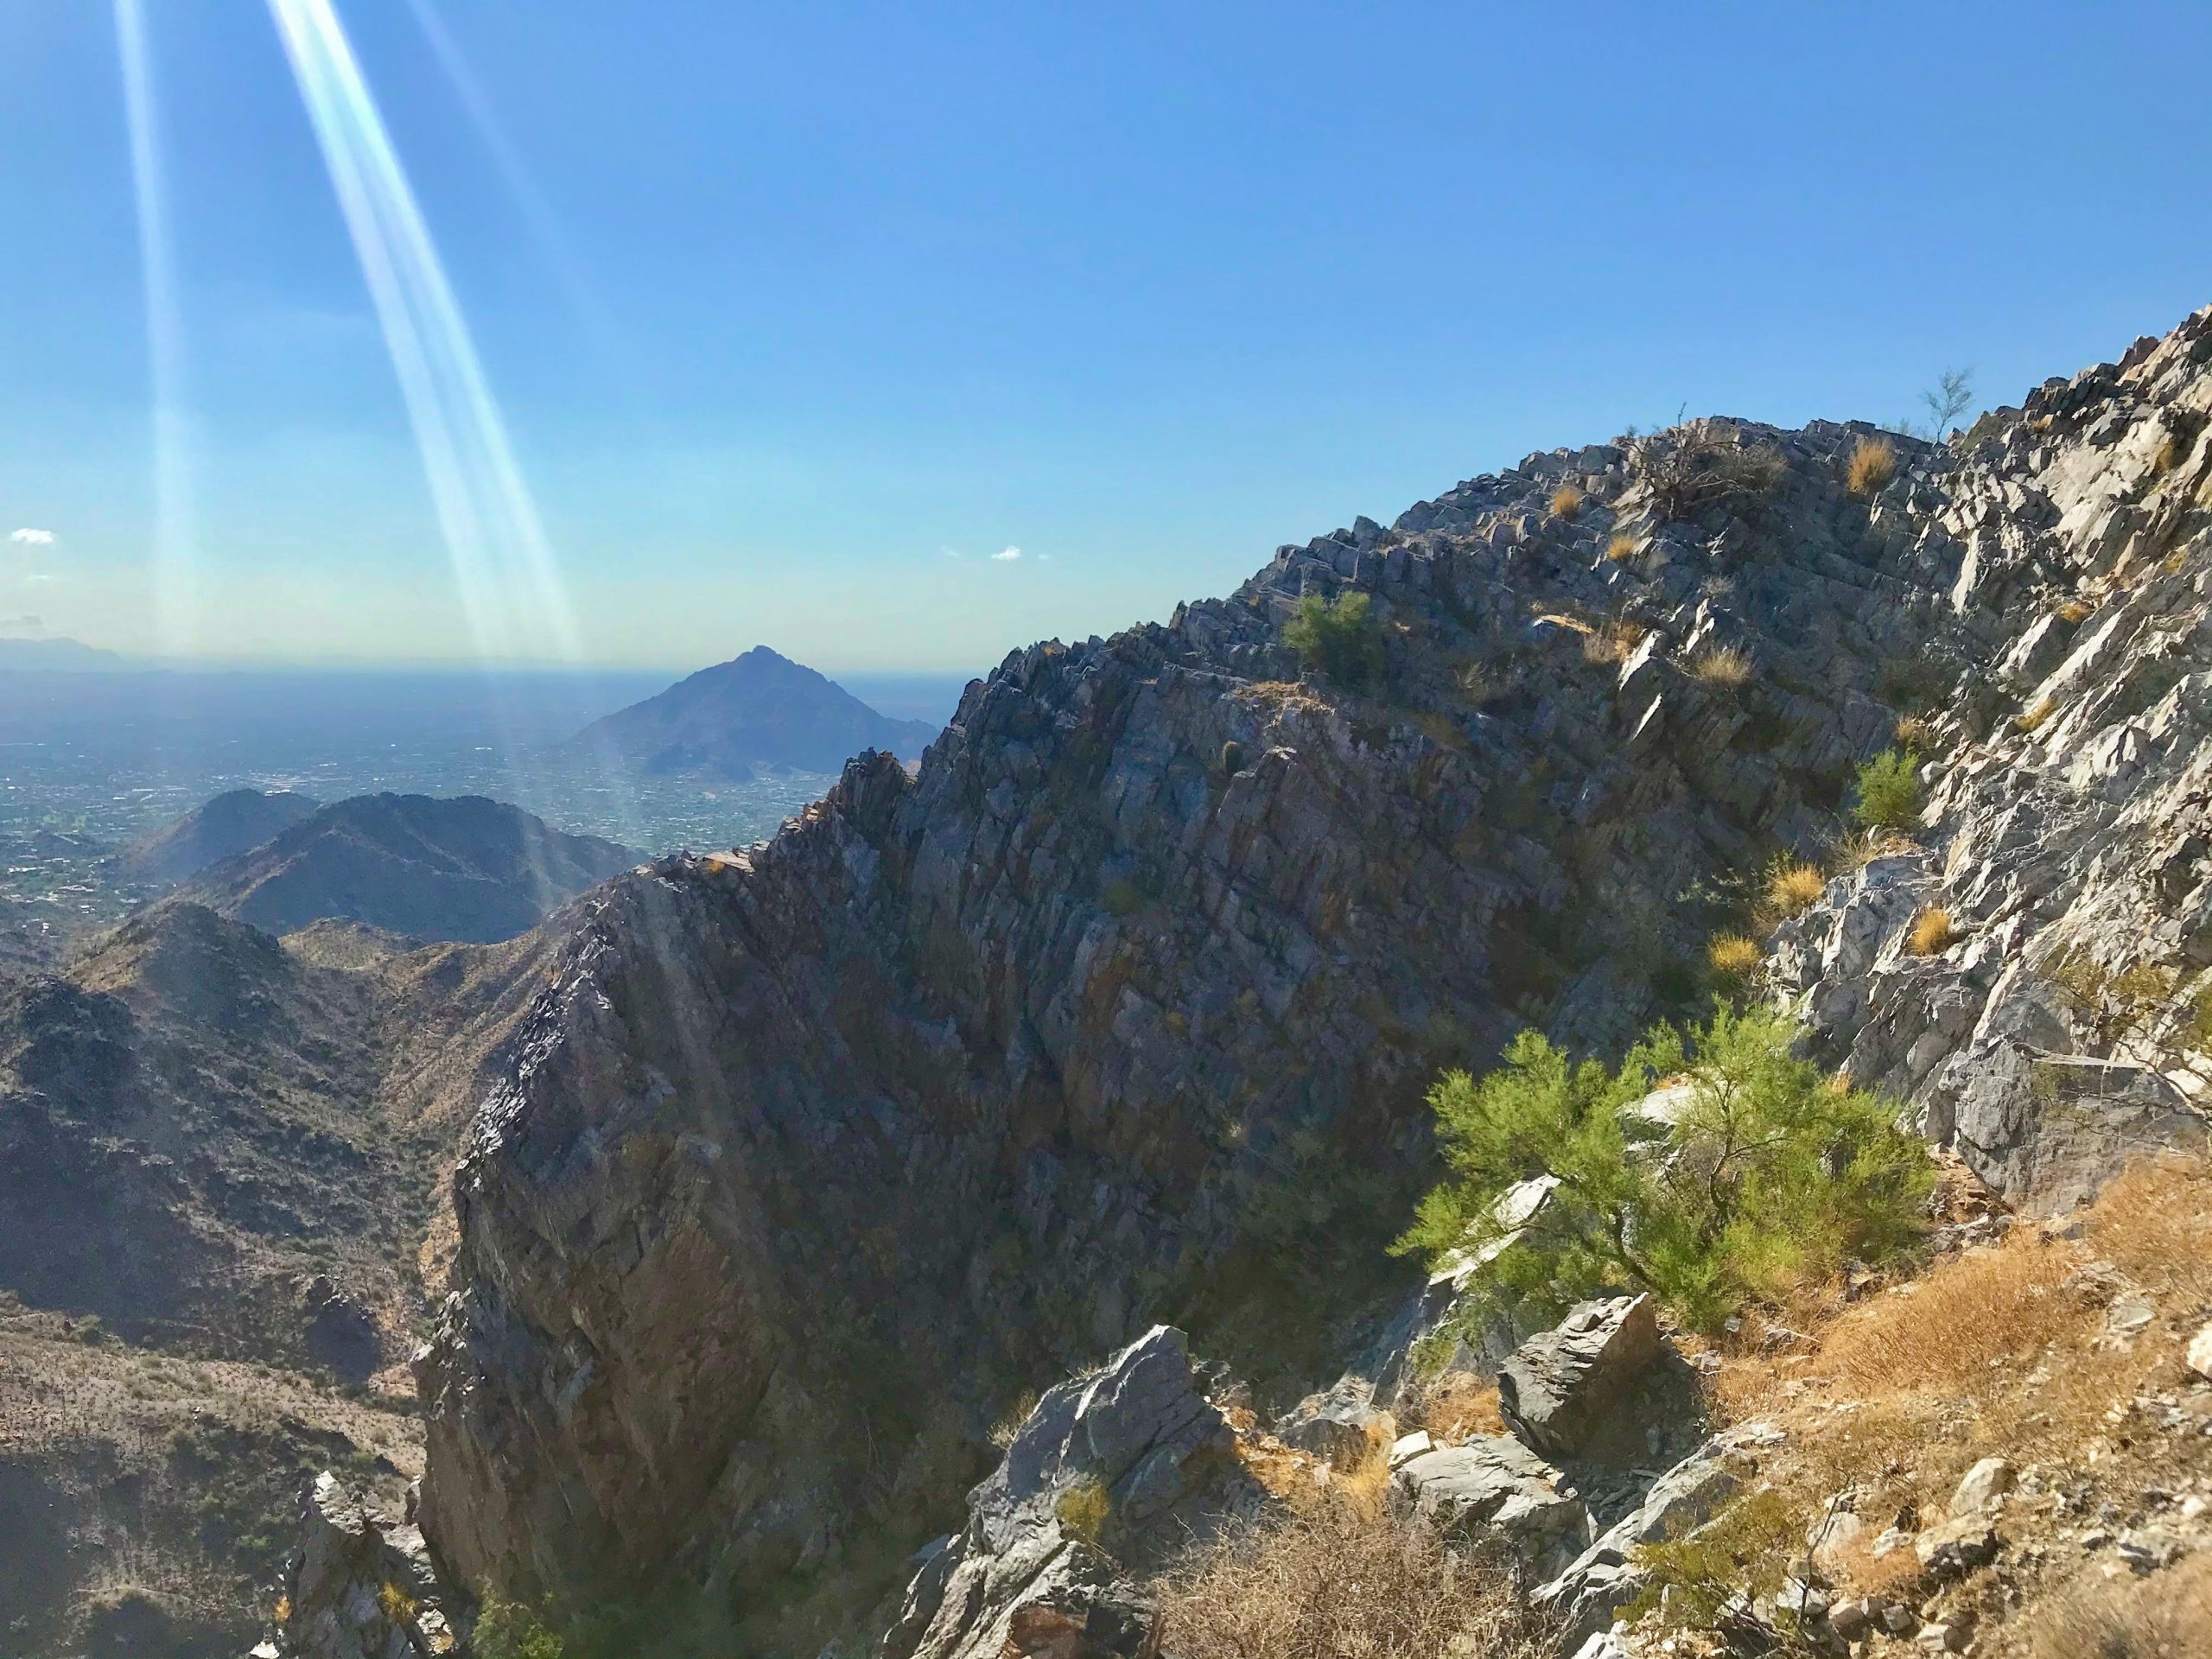 Piestewa vs Camelback? Which should you hike? Camelback from Piestewa